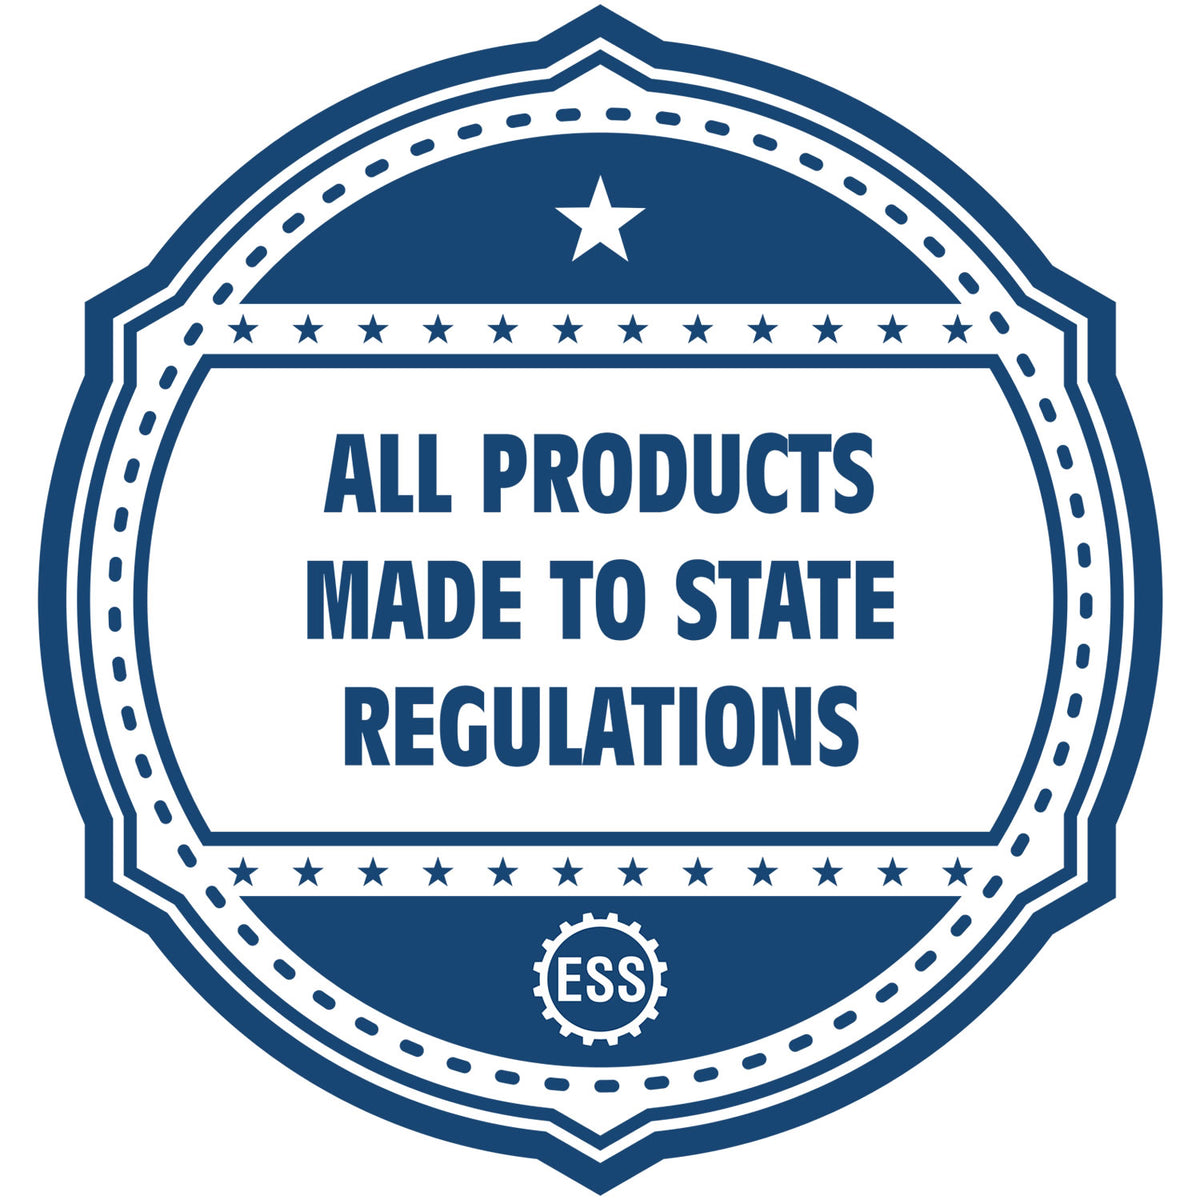 A blue icon or badge for the Hybrid Oklahoma Engineer Seal showing that this product is made in compliance with state regulations.